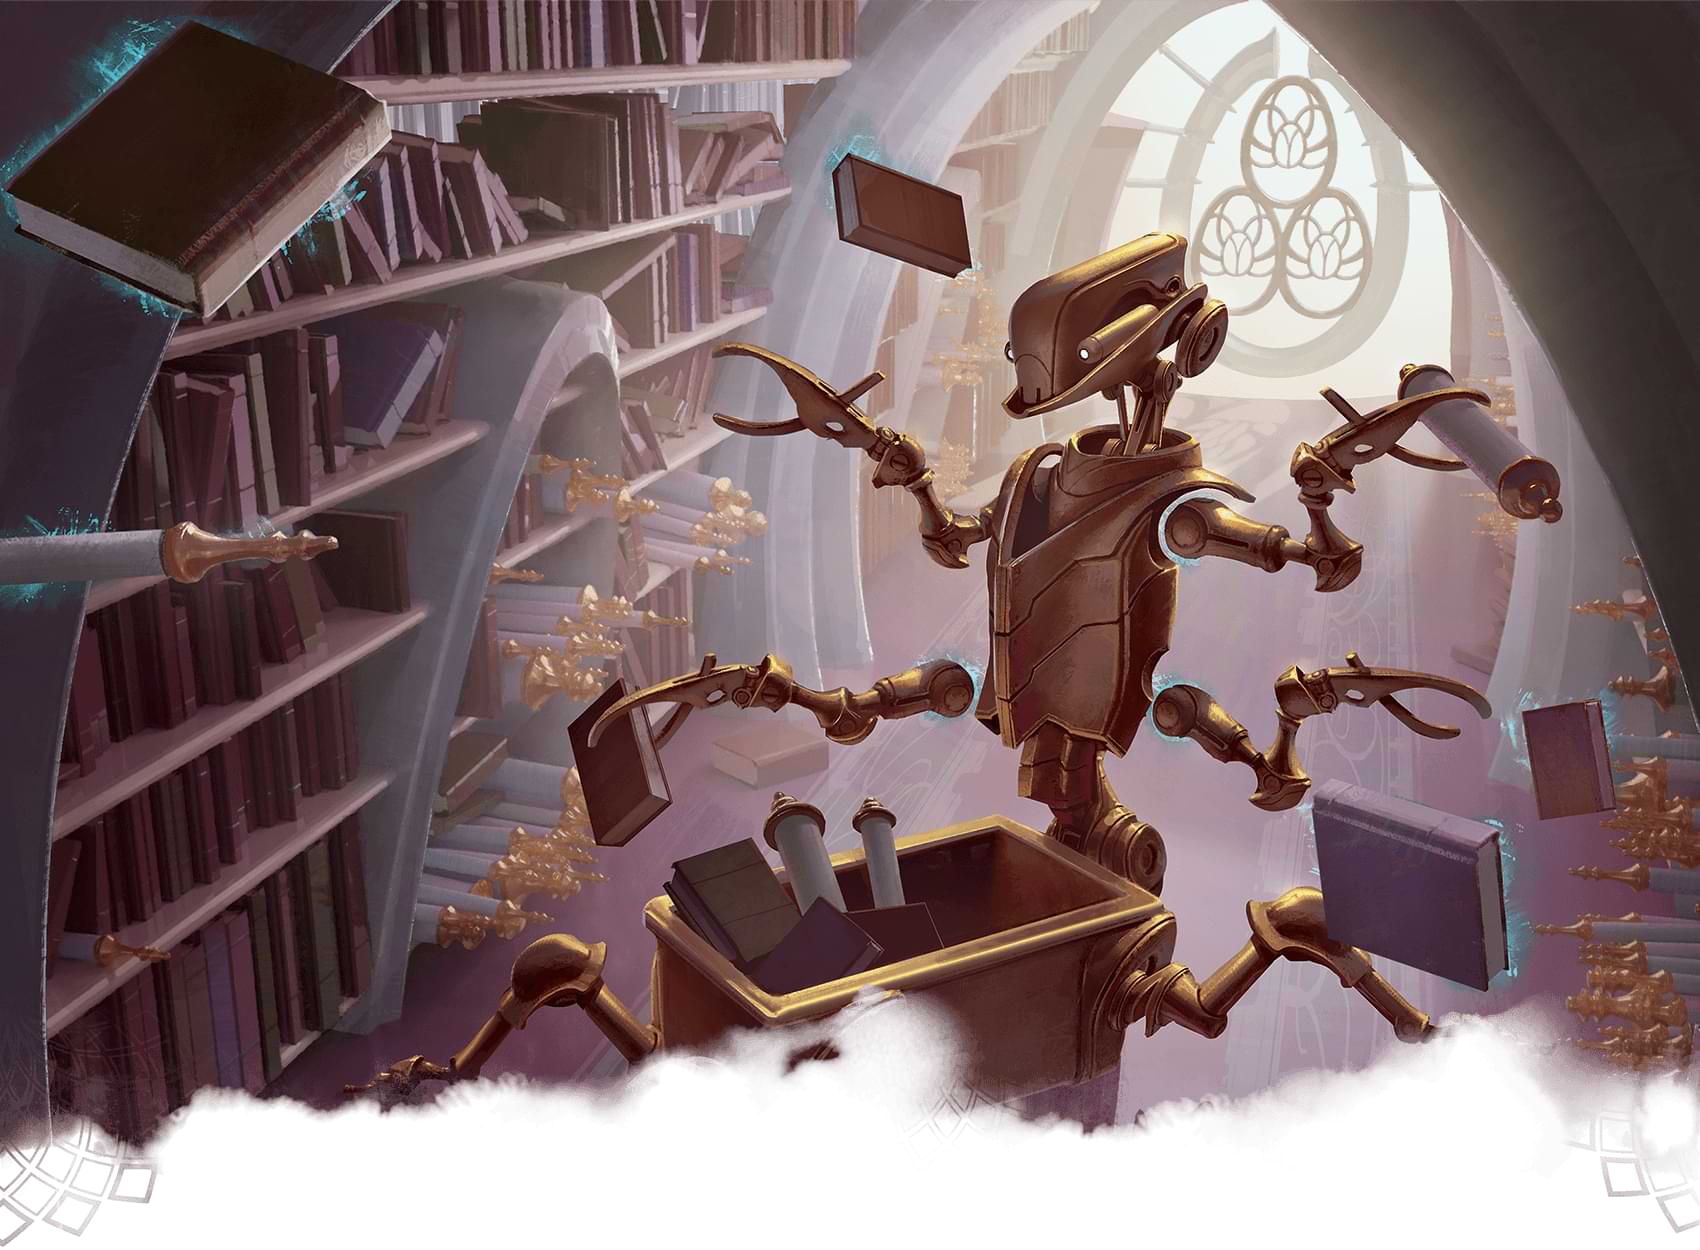 A magical robot sorting books and scrolls in a library